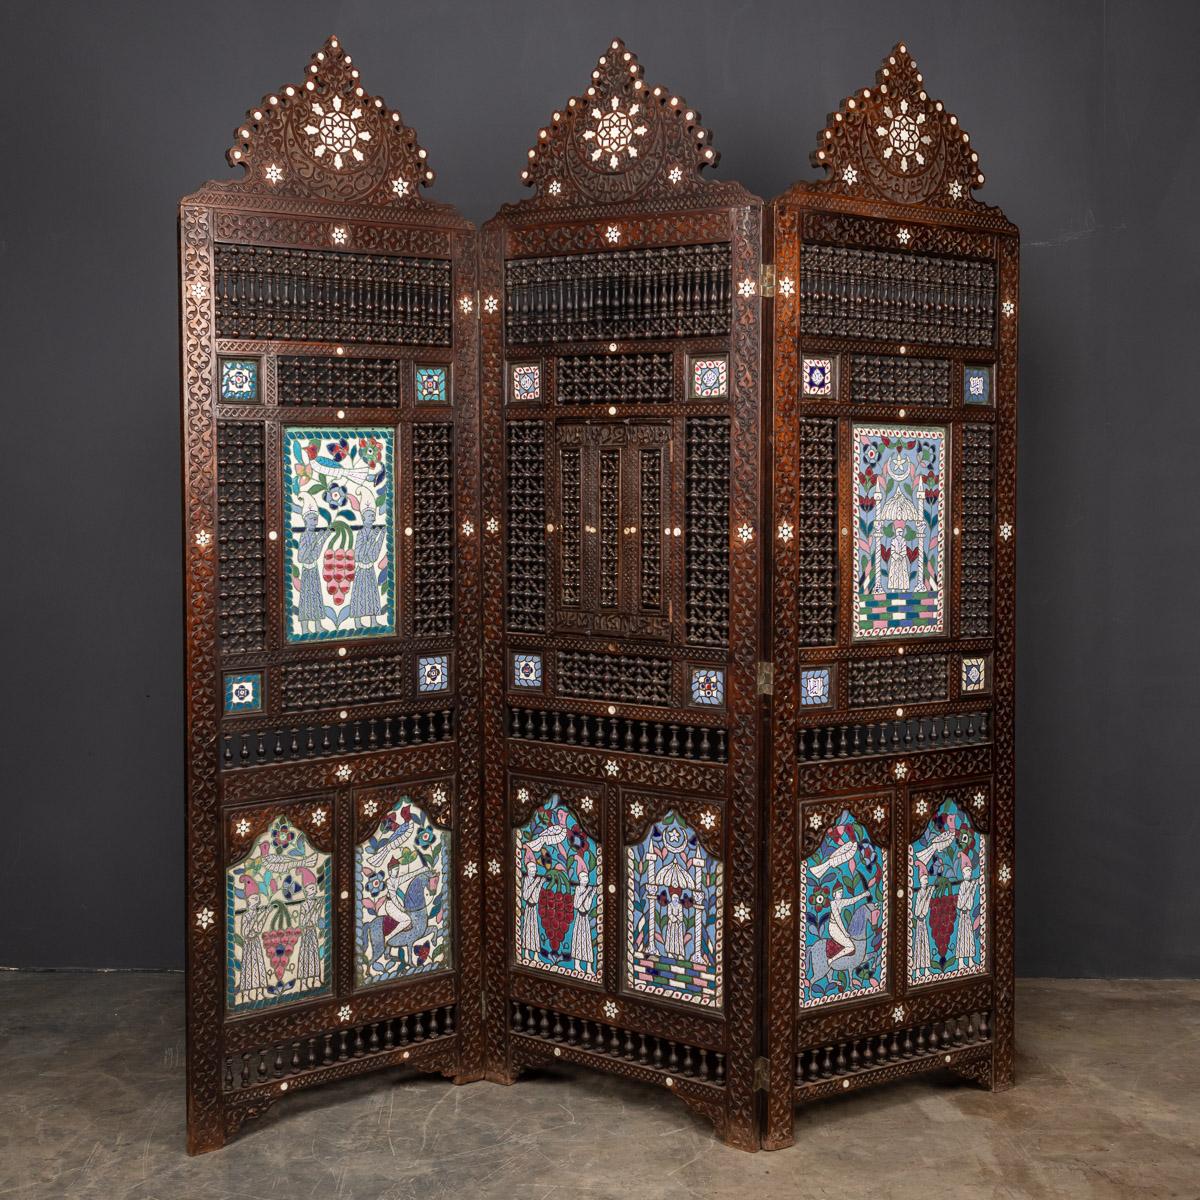 Unknown 20th Century Middle-Eastern Folding Screen with Enamel Panels